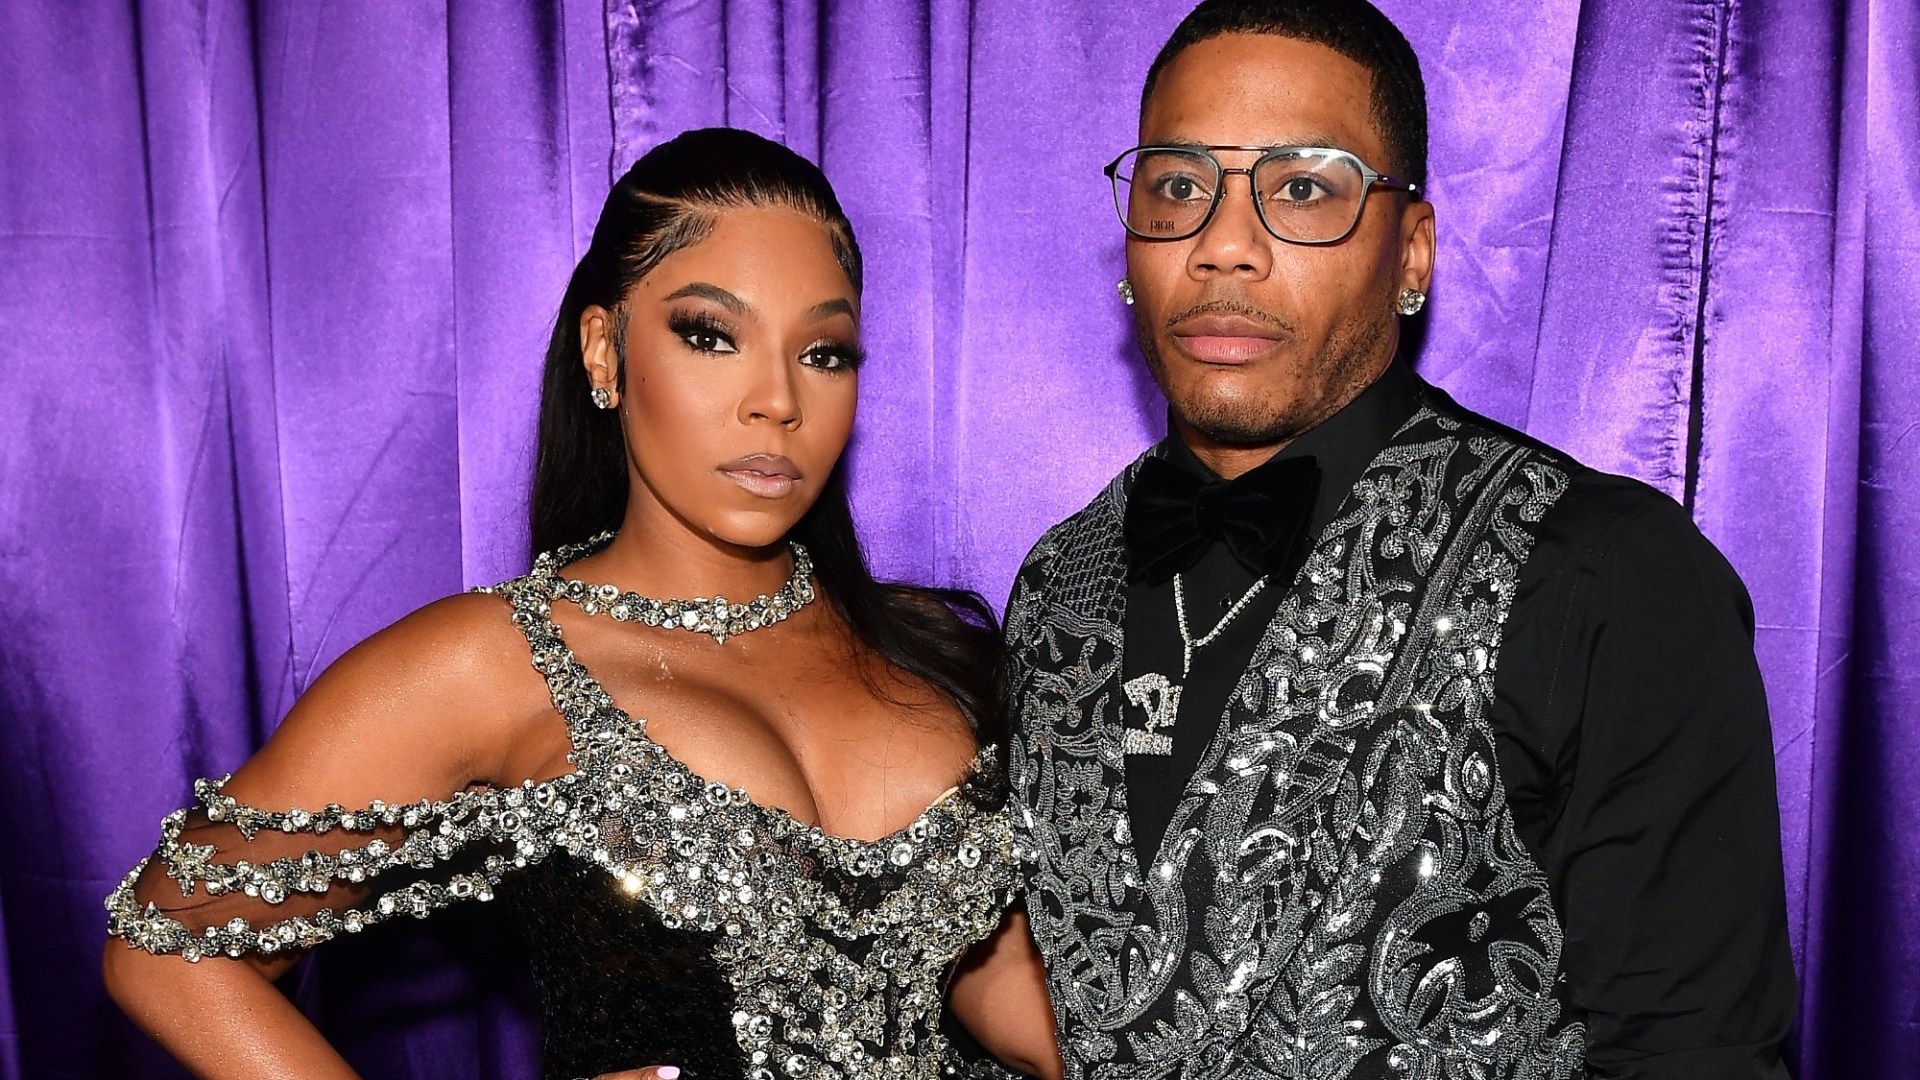 Are Ashanti and Nelly engaged, and do they have children together?